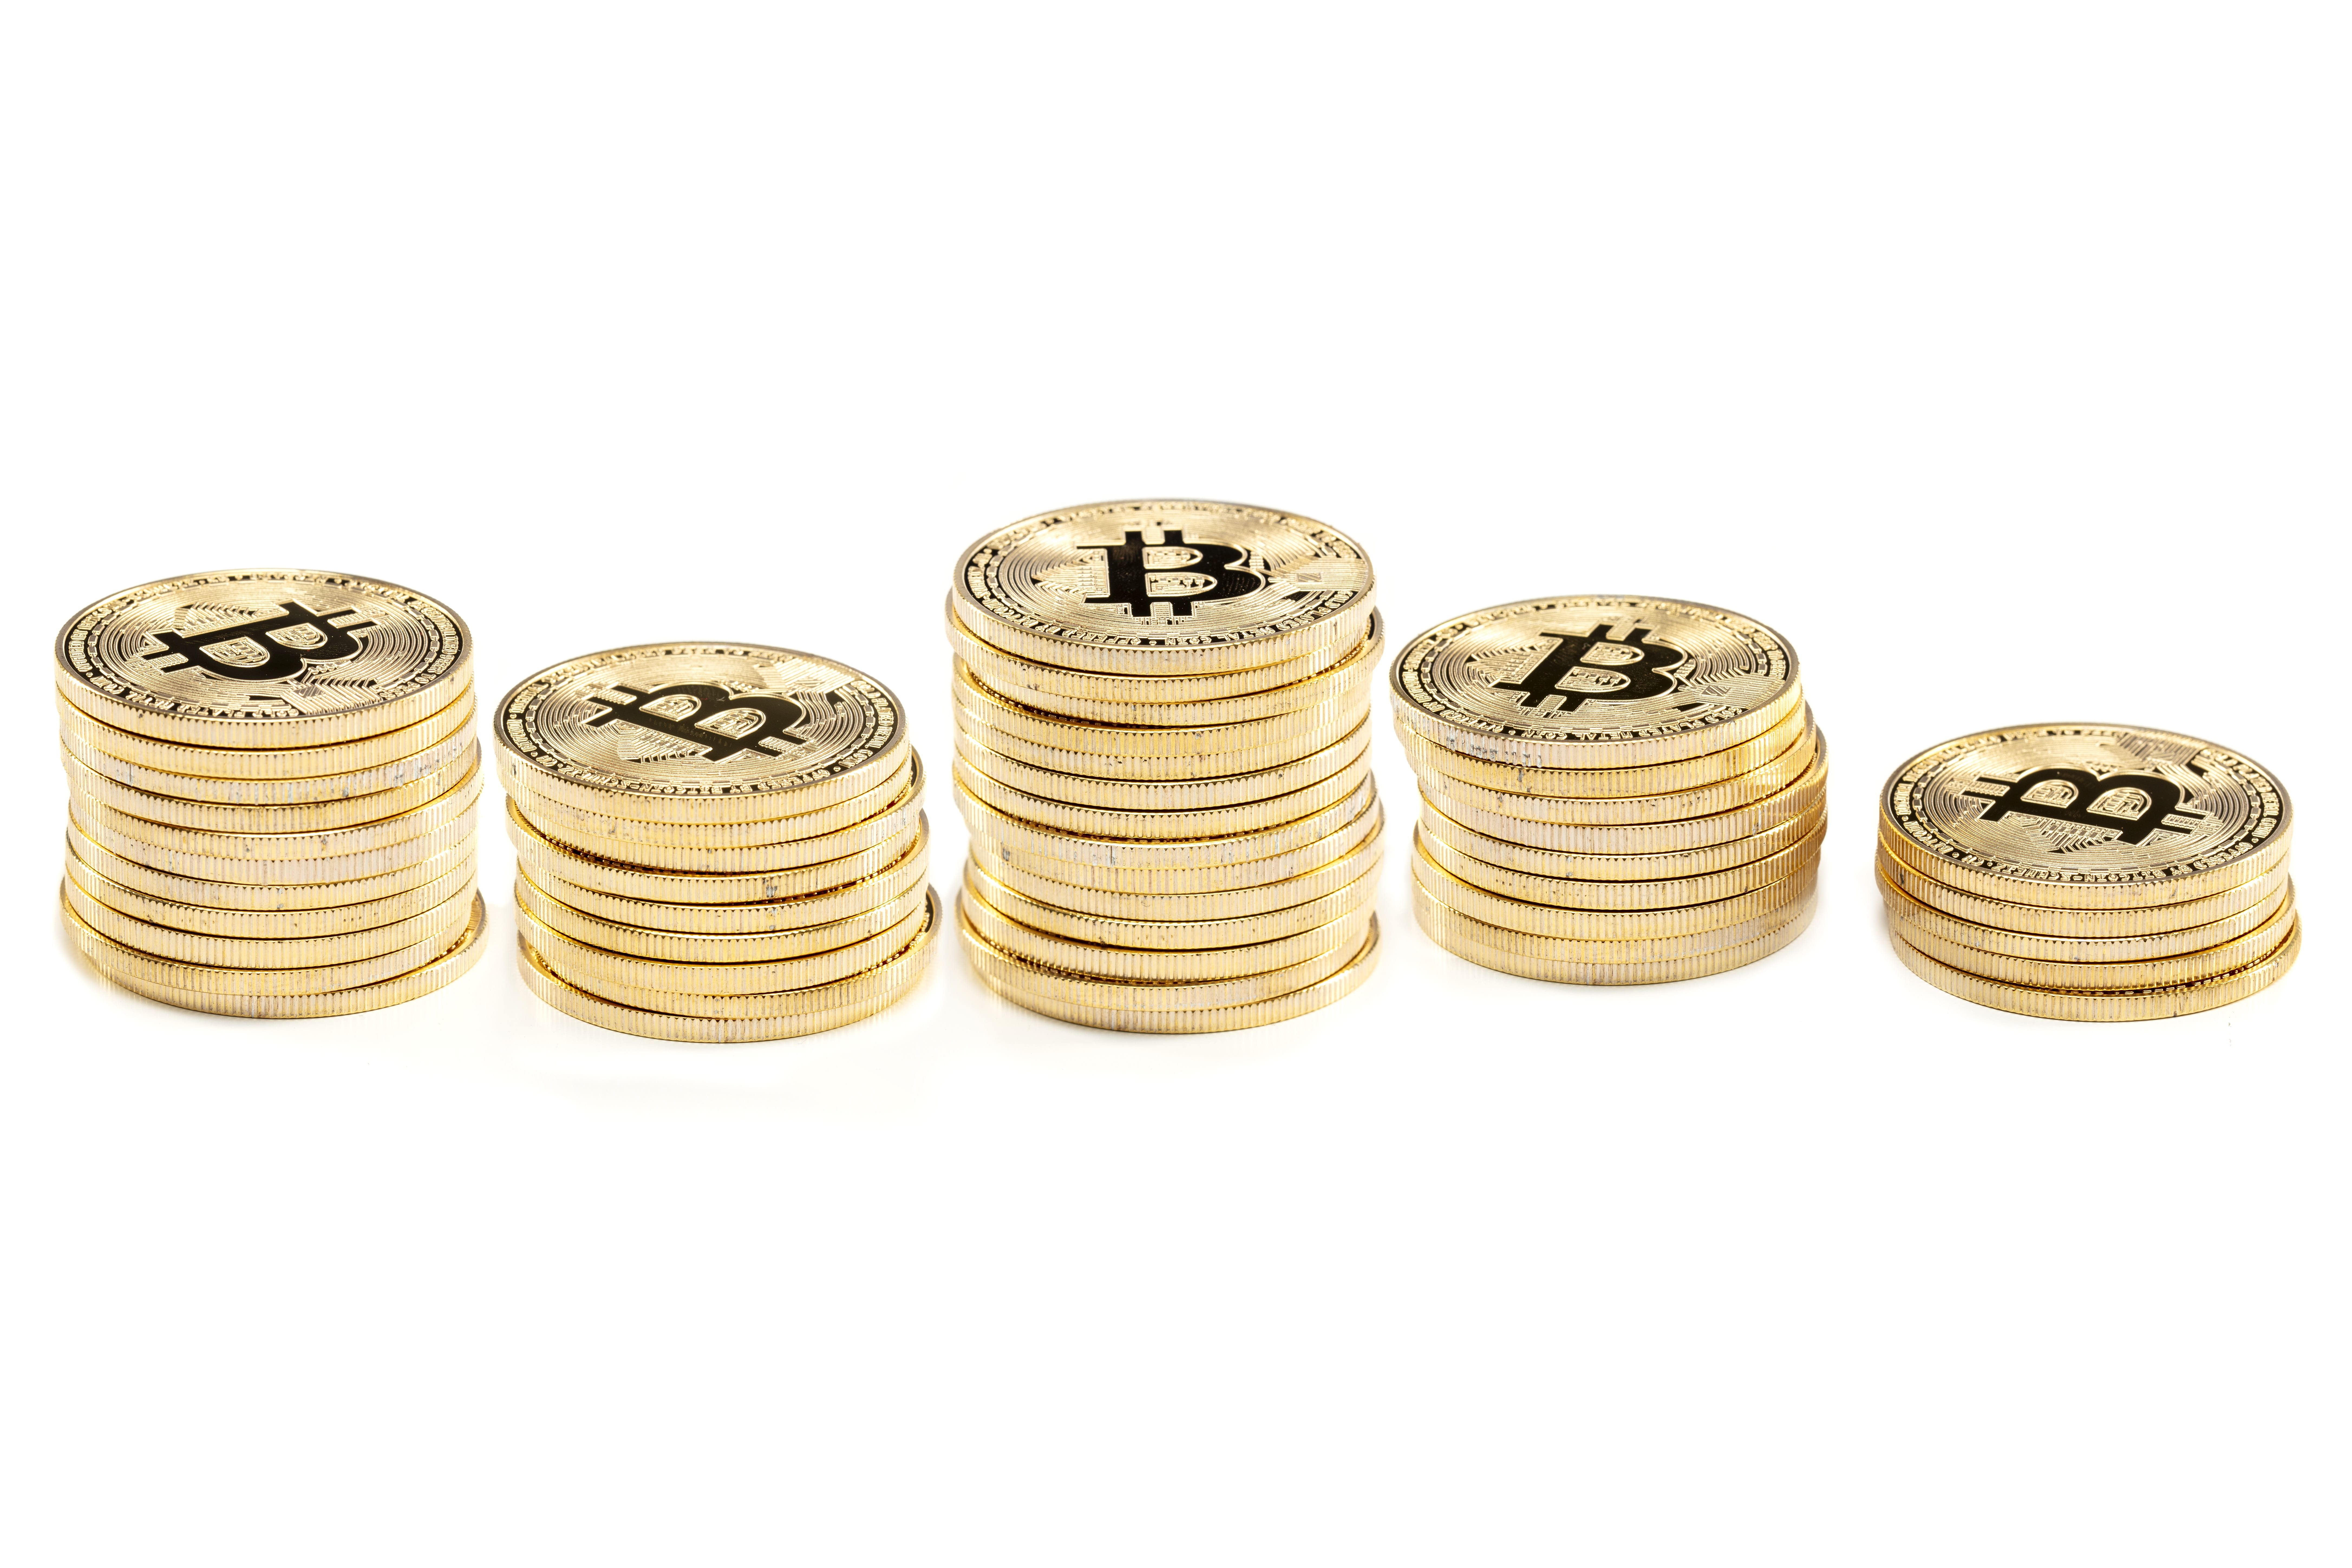 cryptocurrency, coins, bitcoin, white background, studio shot